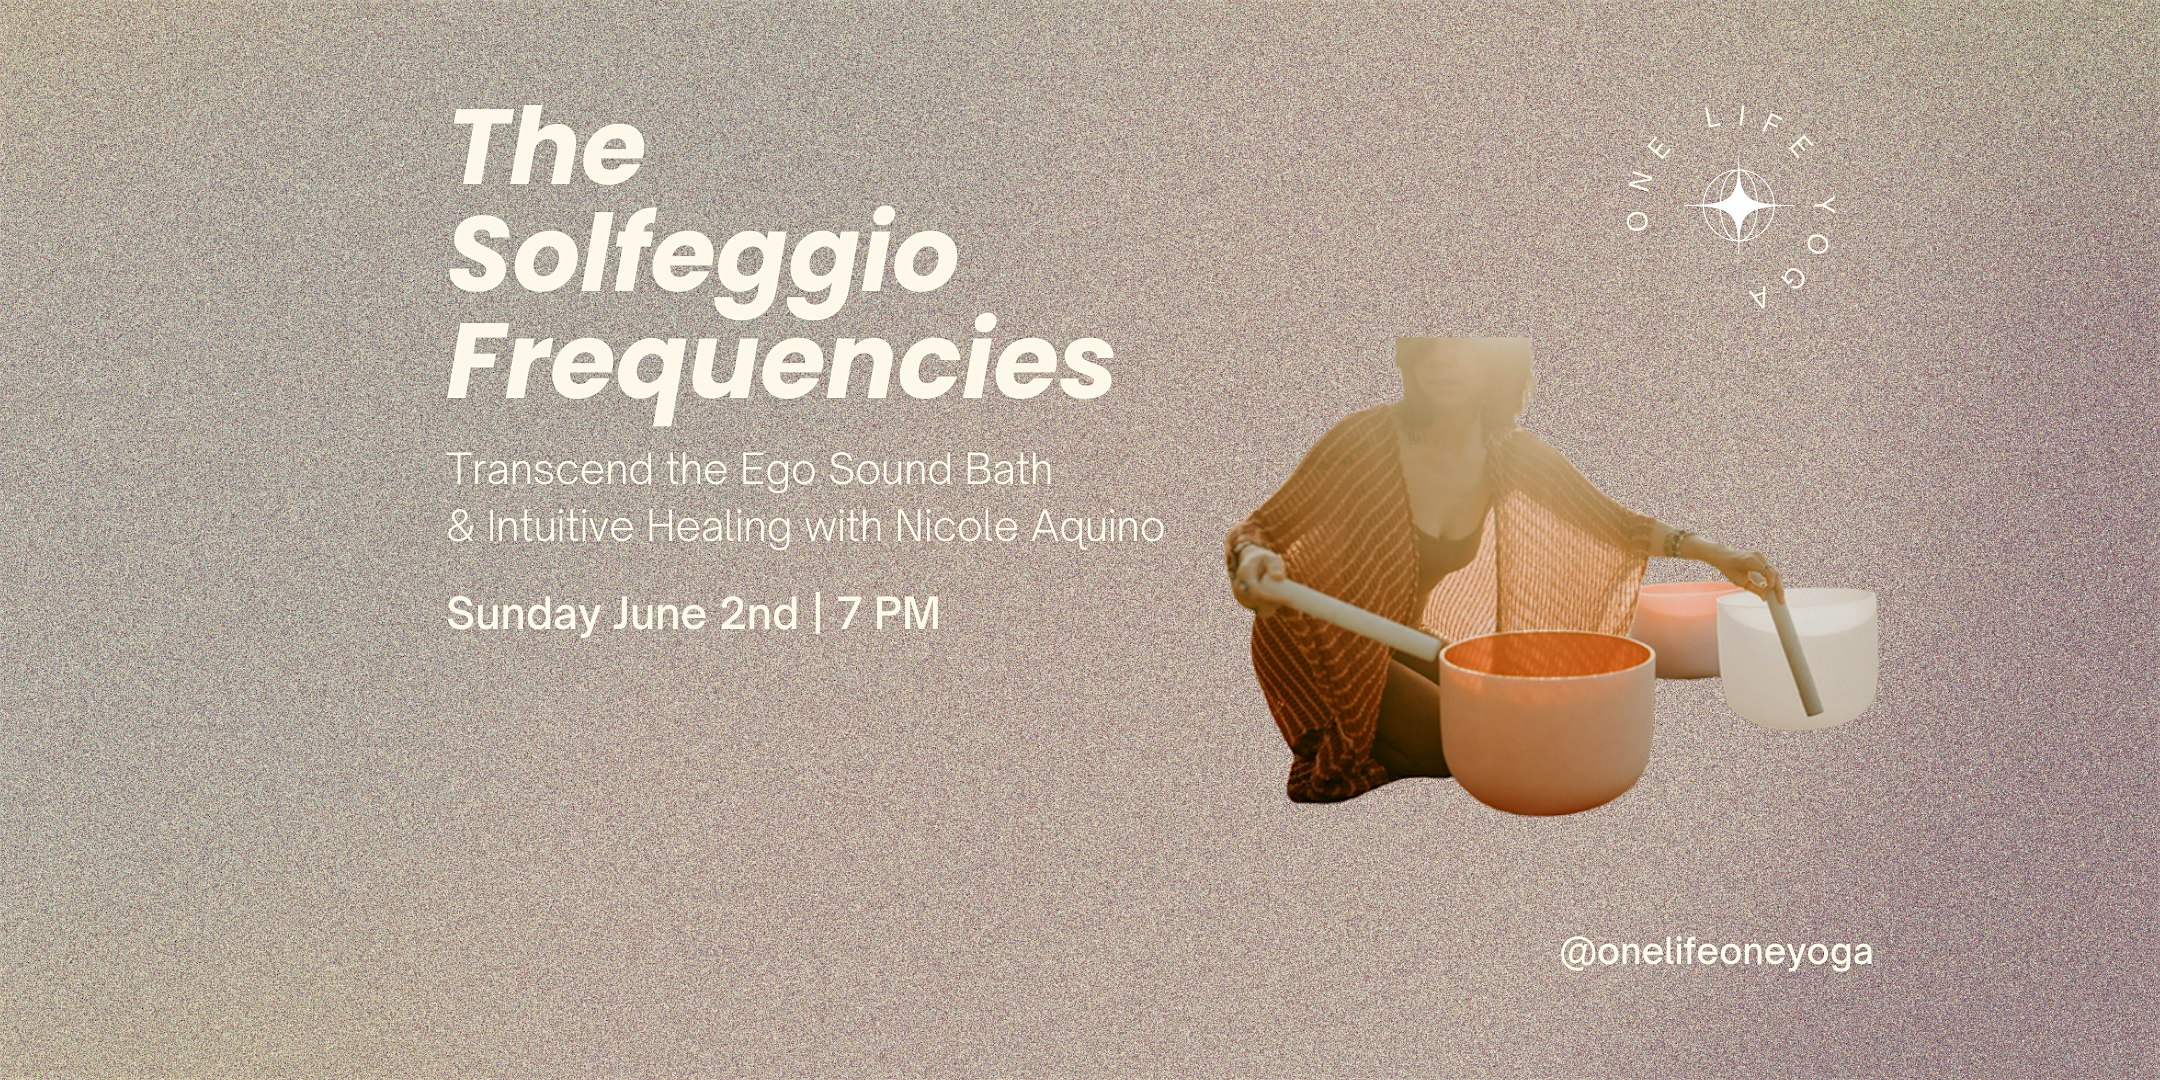 The Solfeggio Frequencies: Transcend the Ego Sound Bath & Intuitive Healing